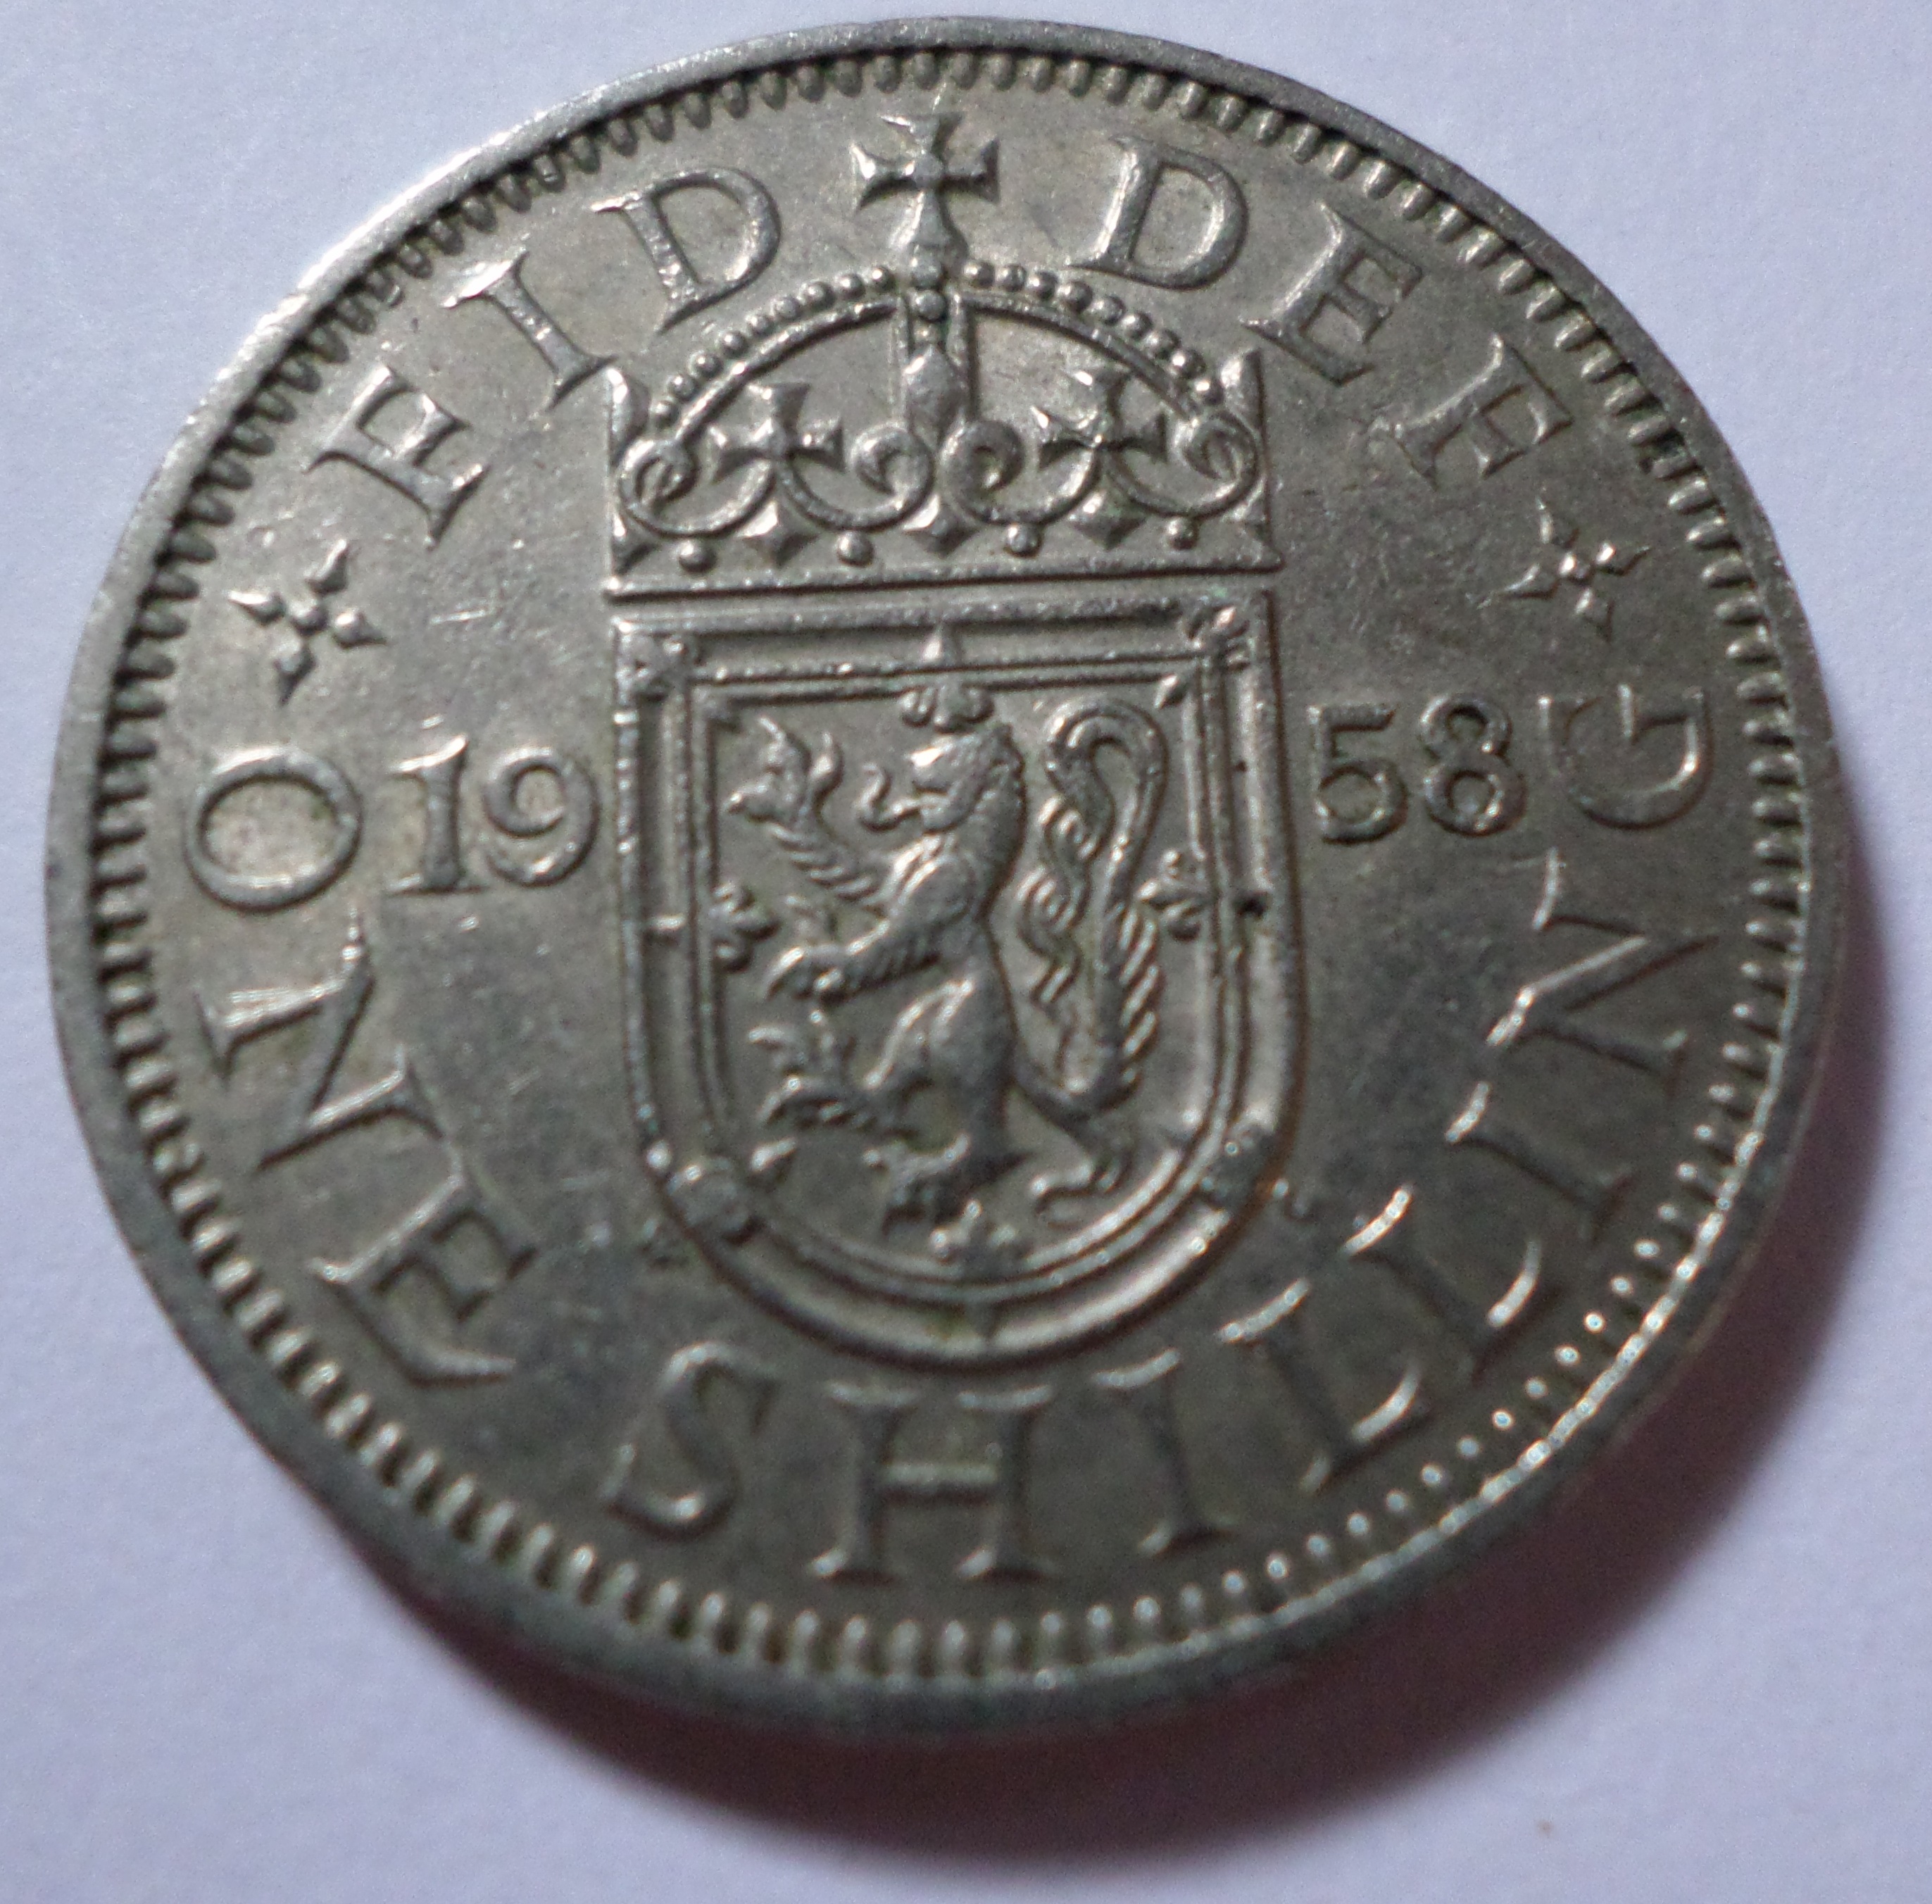 1958 one shilling coin photo